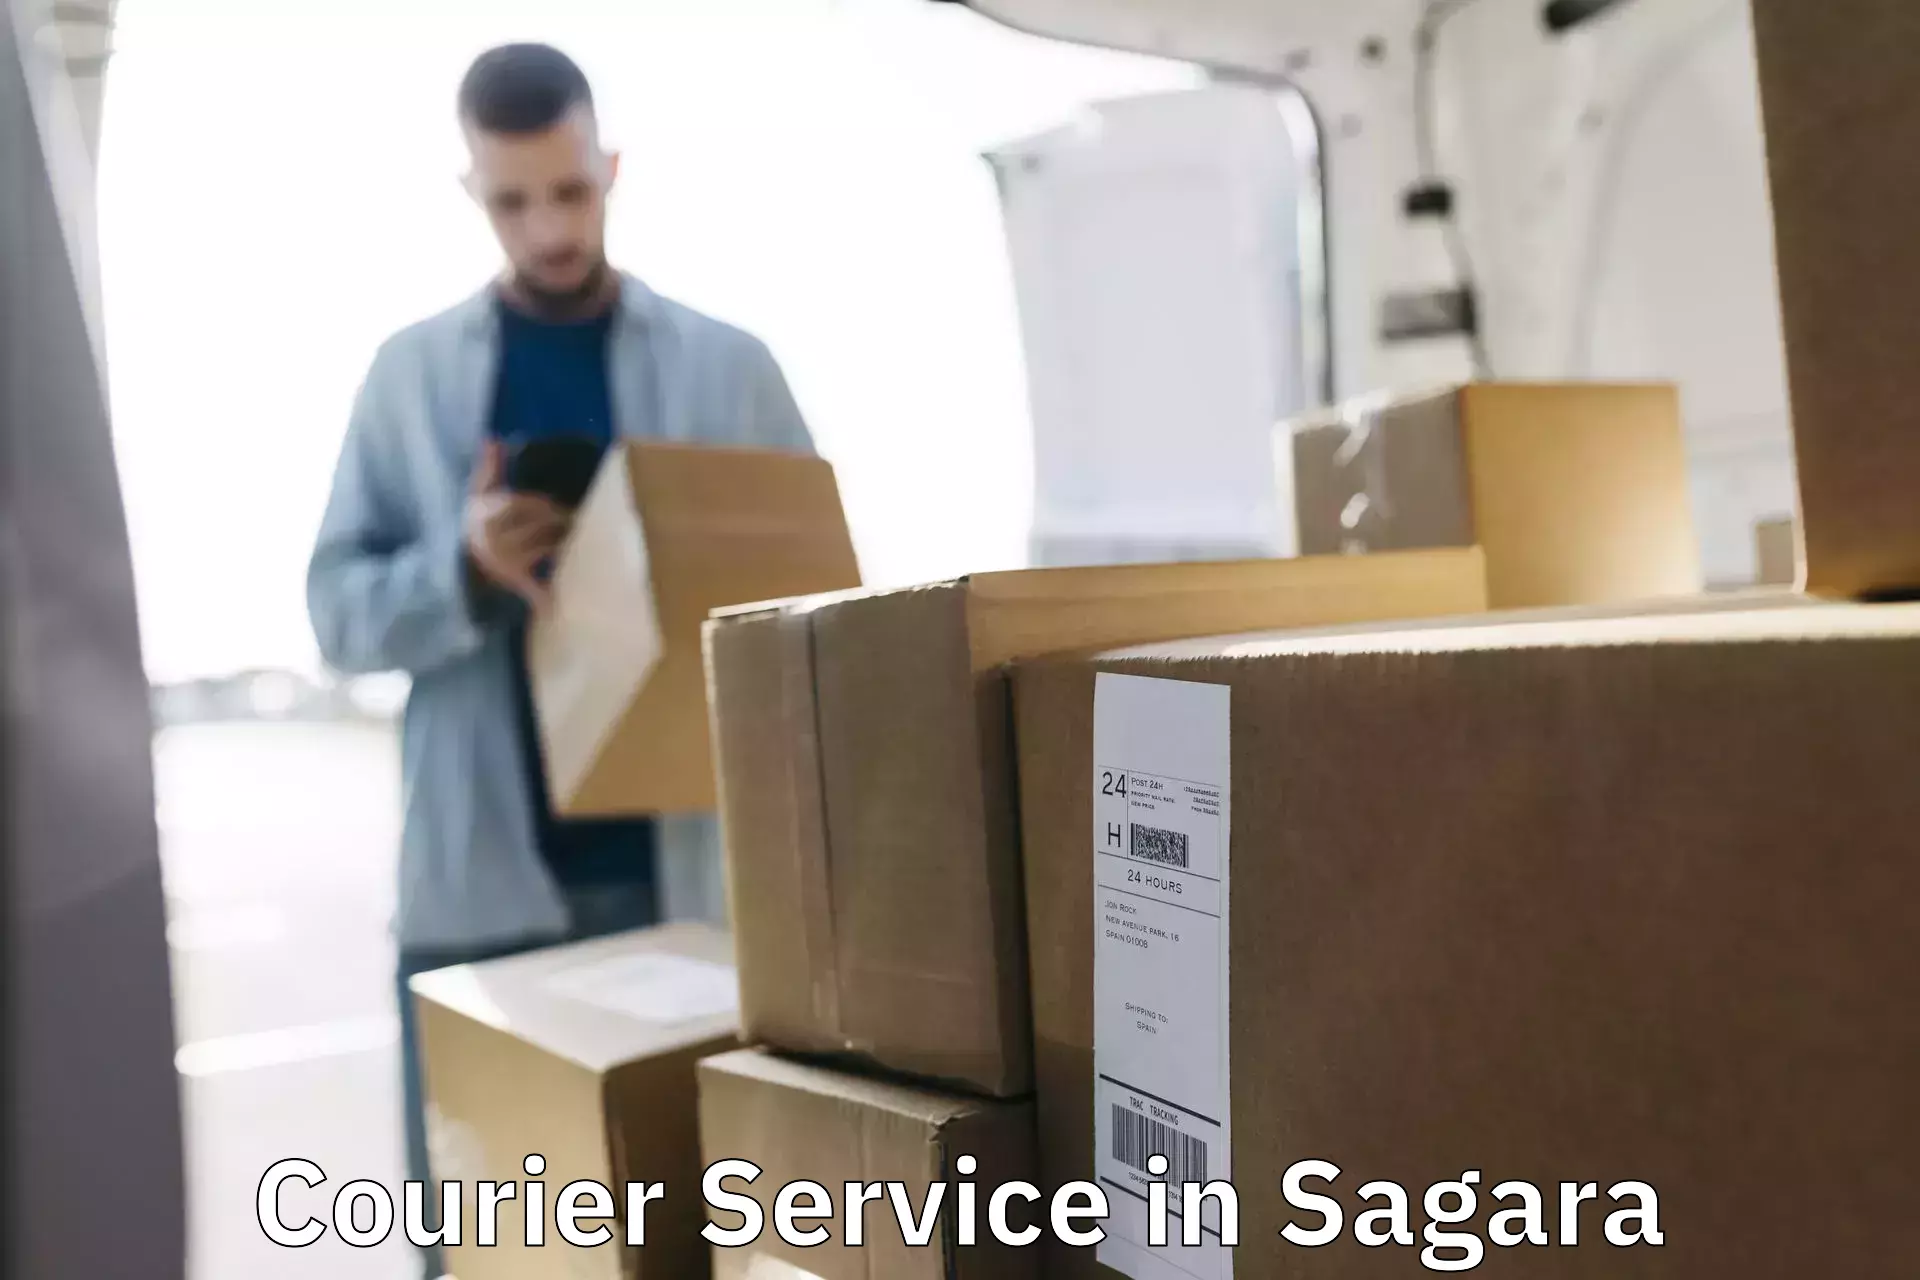 Postal and courier services in Sagara